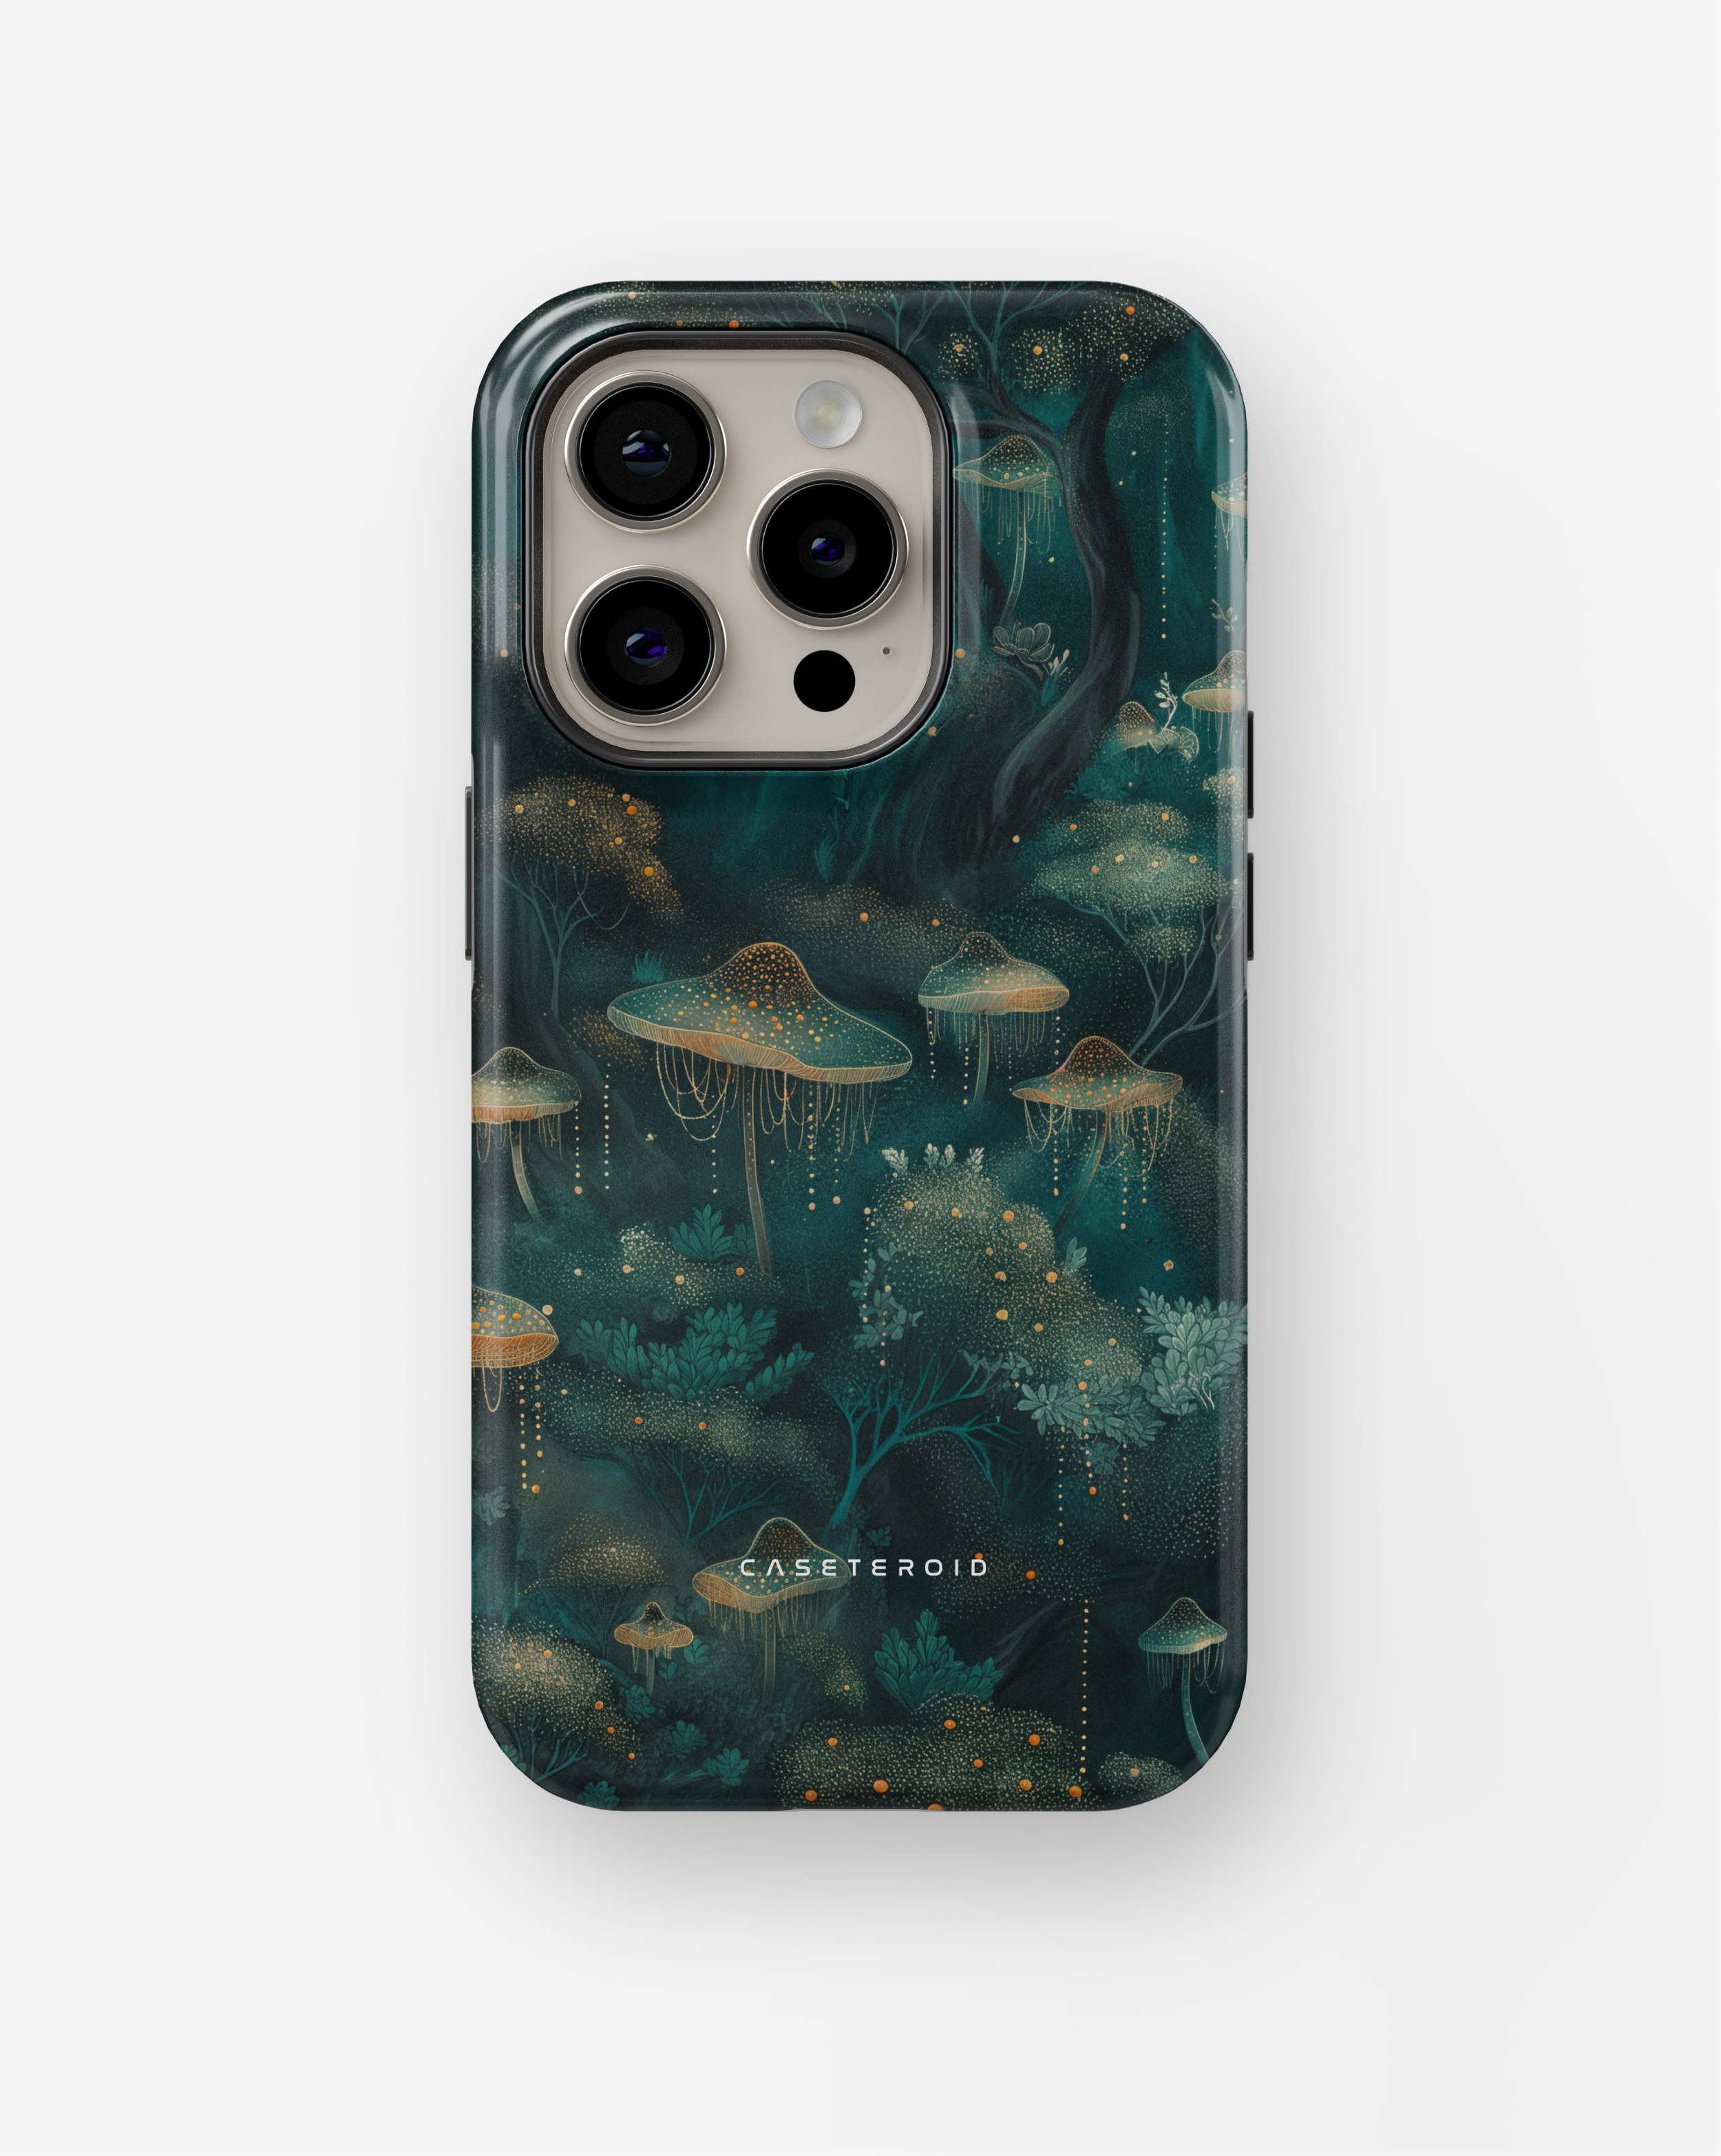 iPhone Tough Case - Mystic Woodland Whispers - CASETEROID